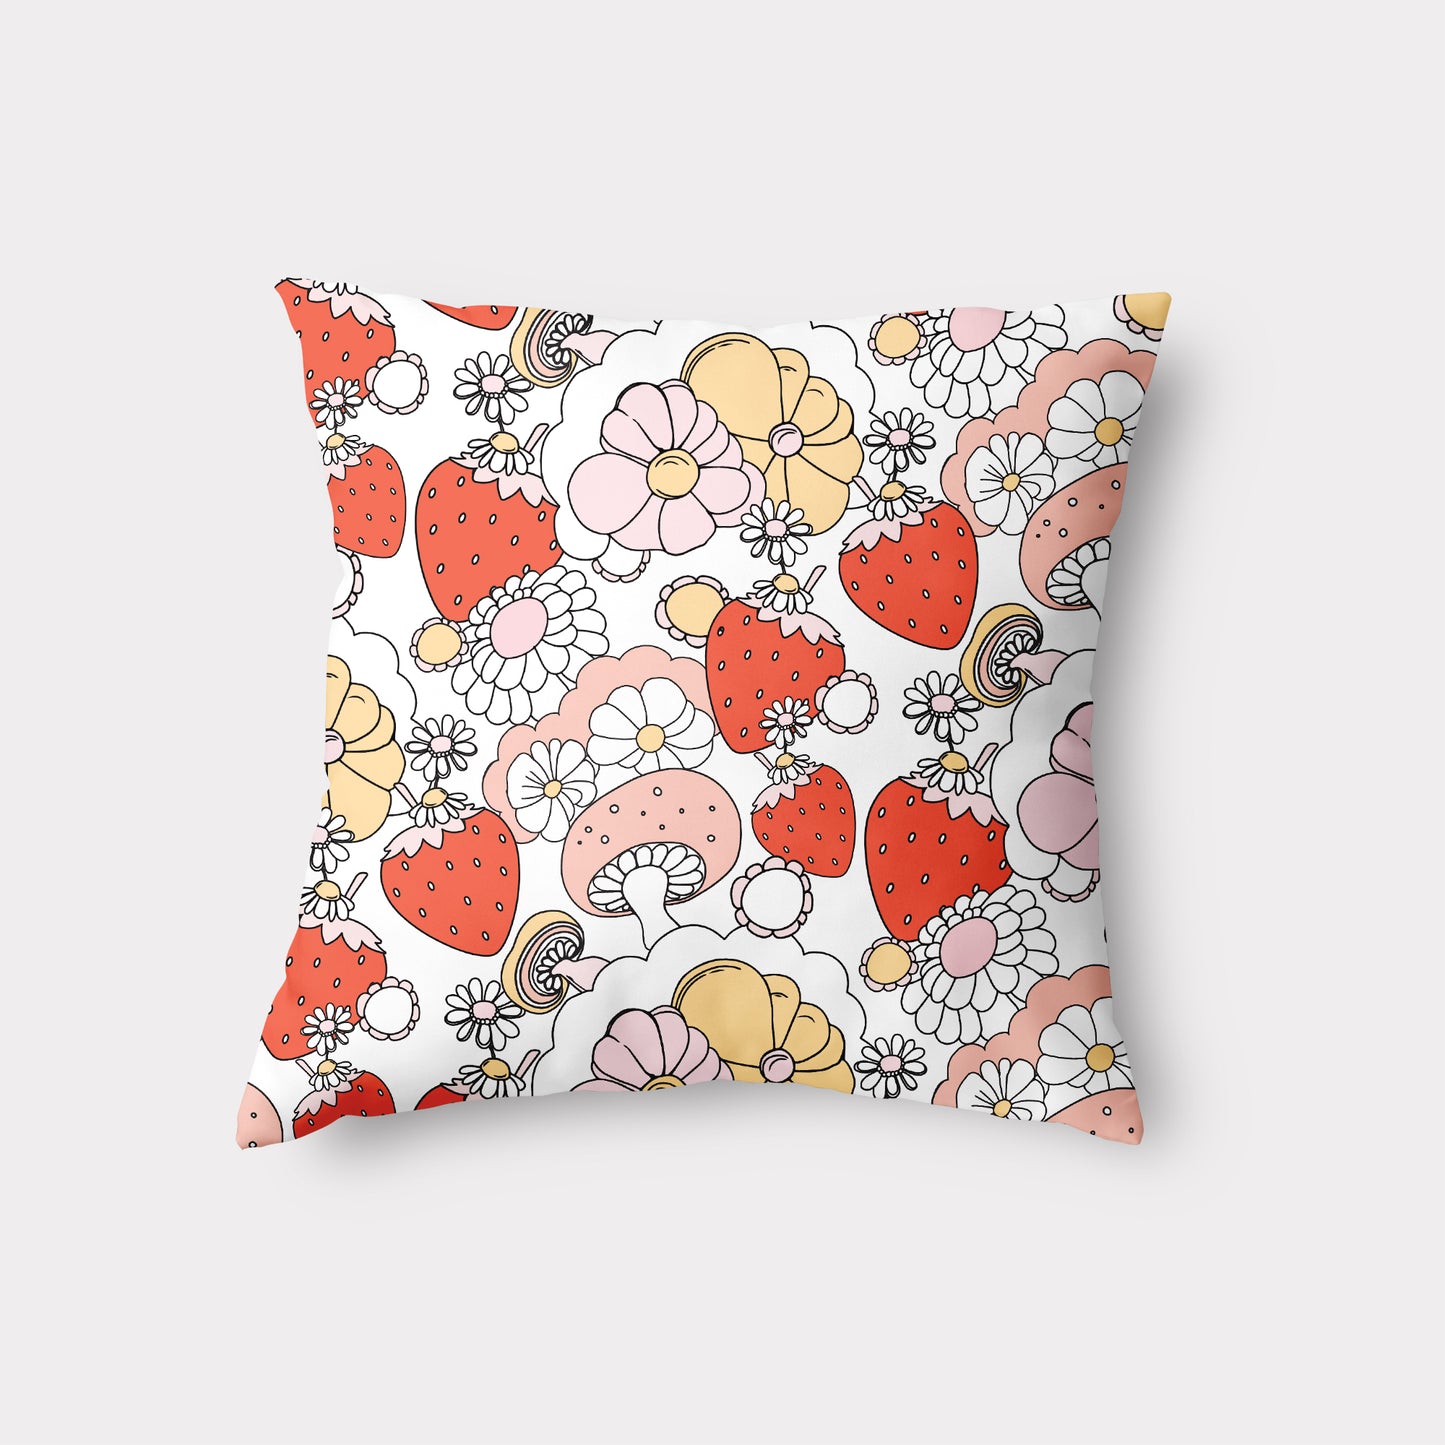 Strawberries + Flowers Cushion Cover